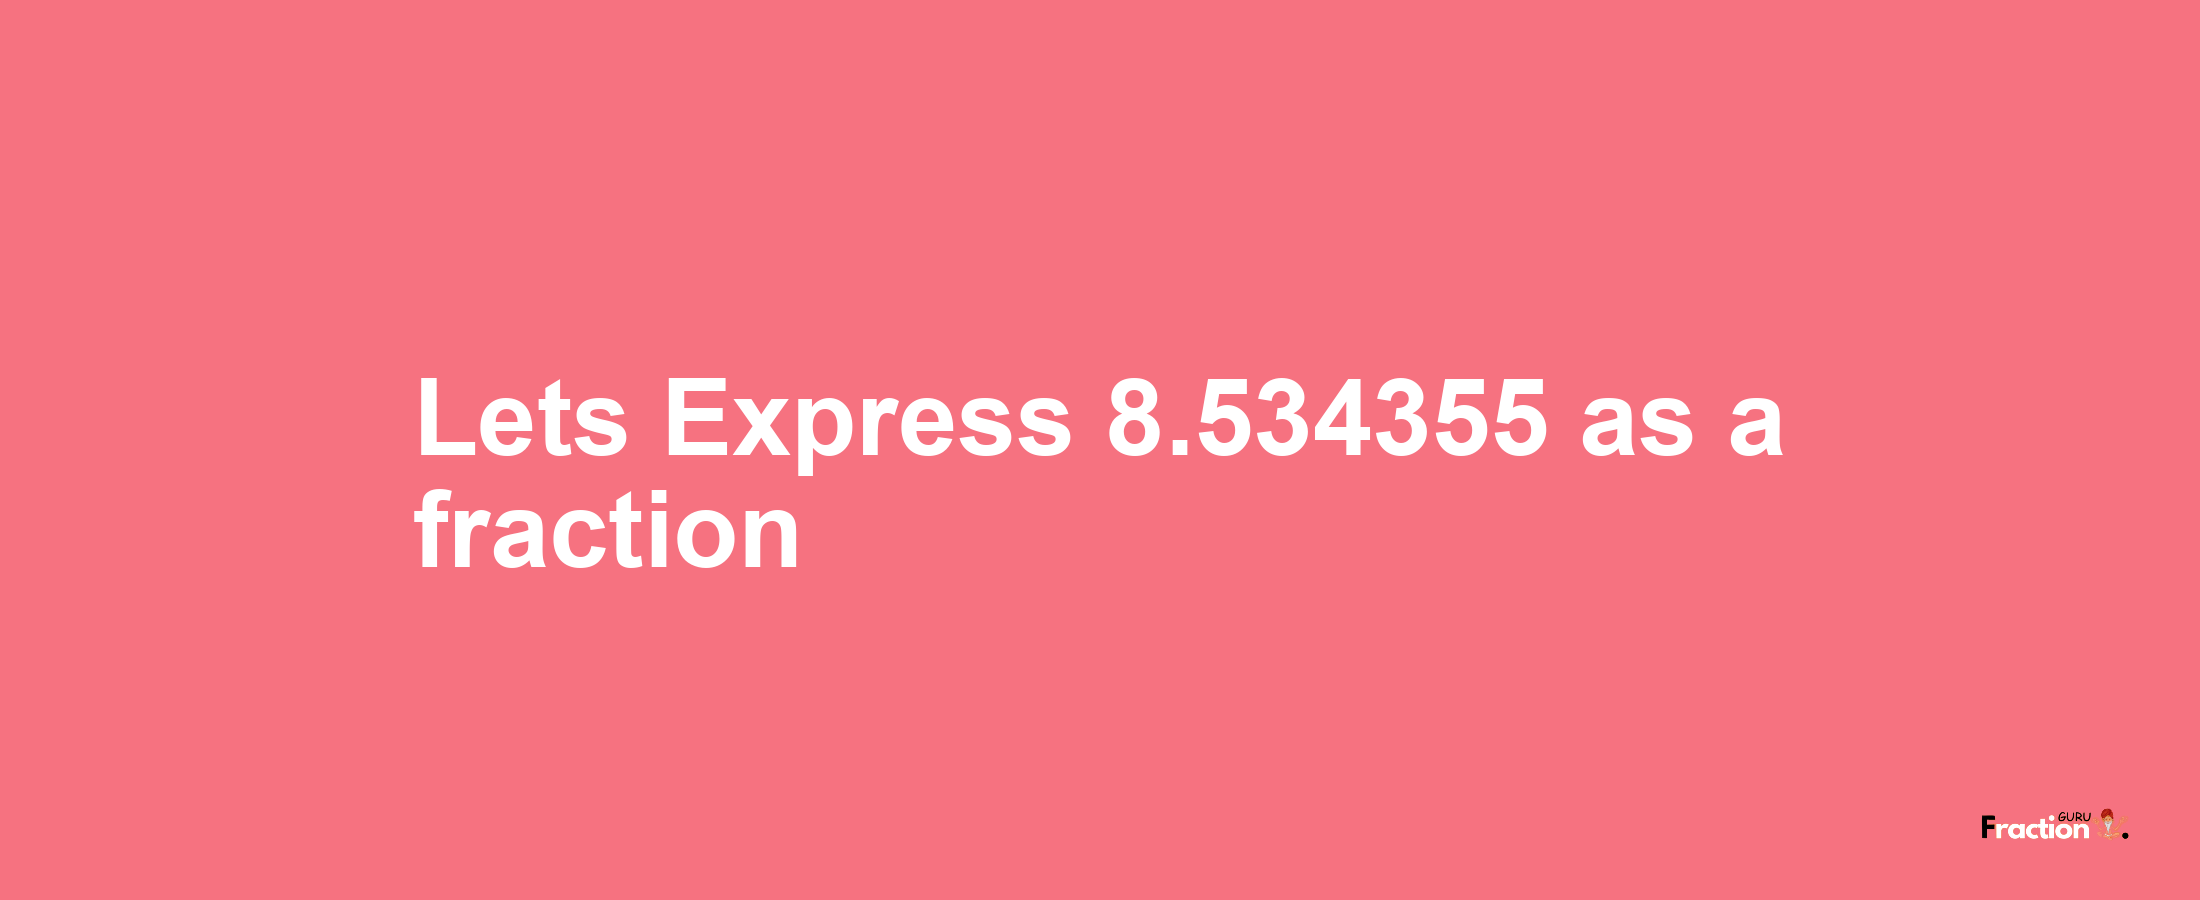 Lets Express 8.534355 as afraction